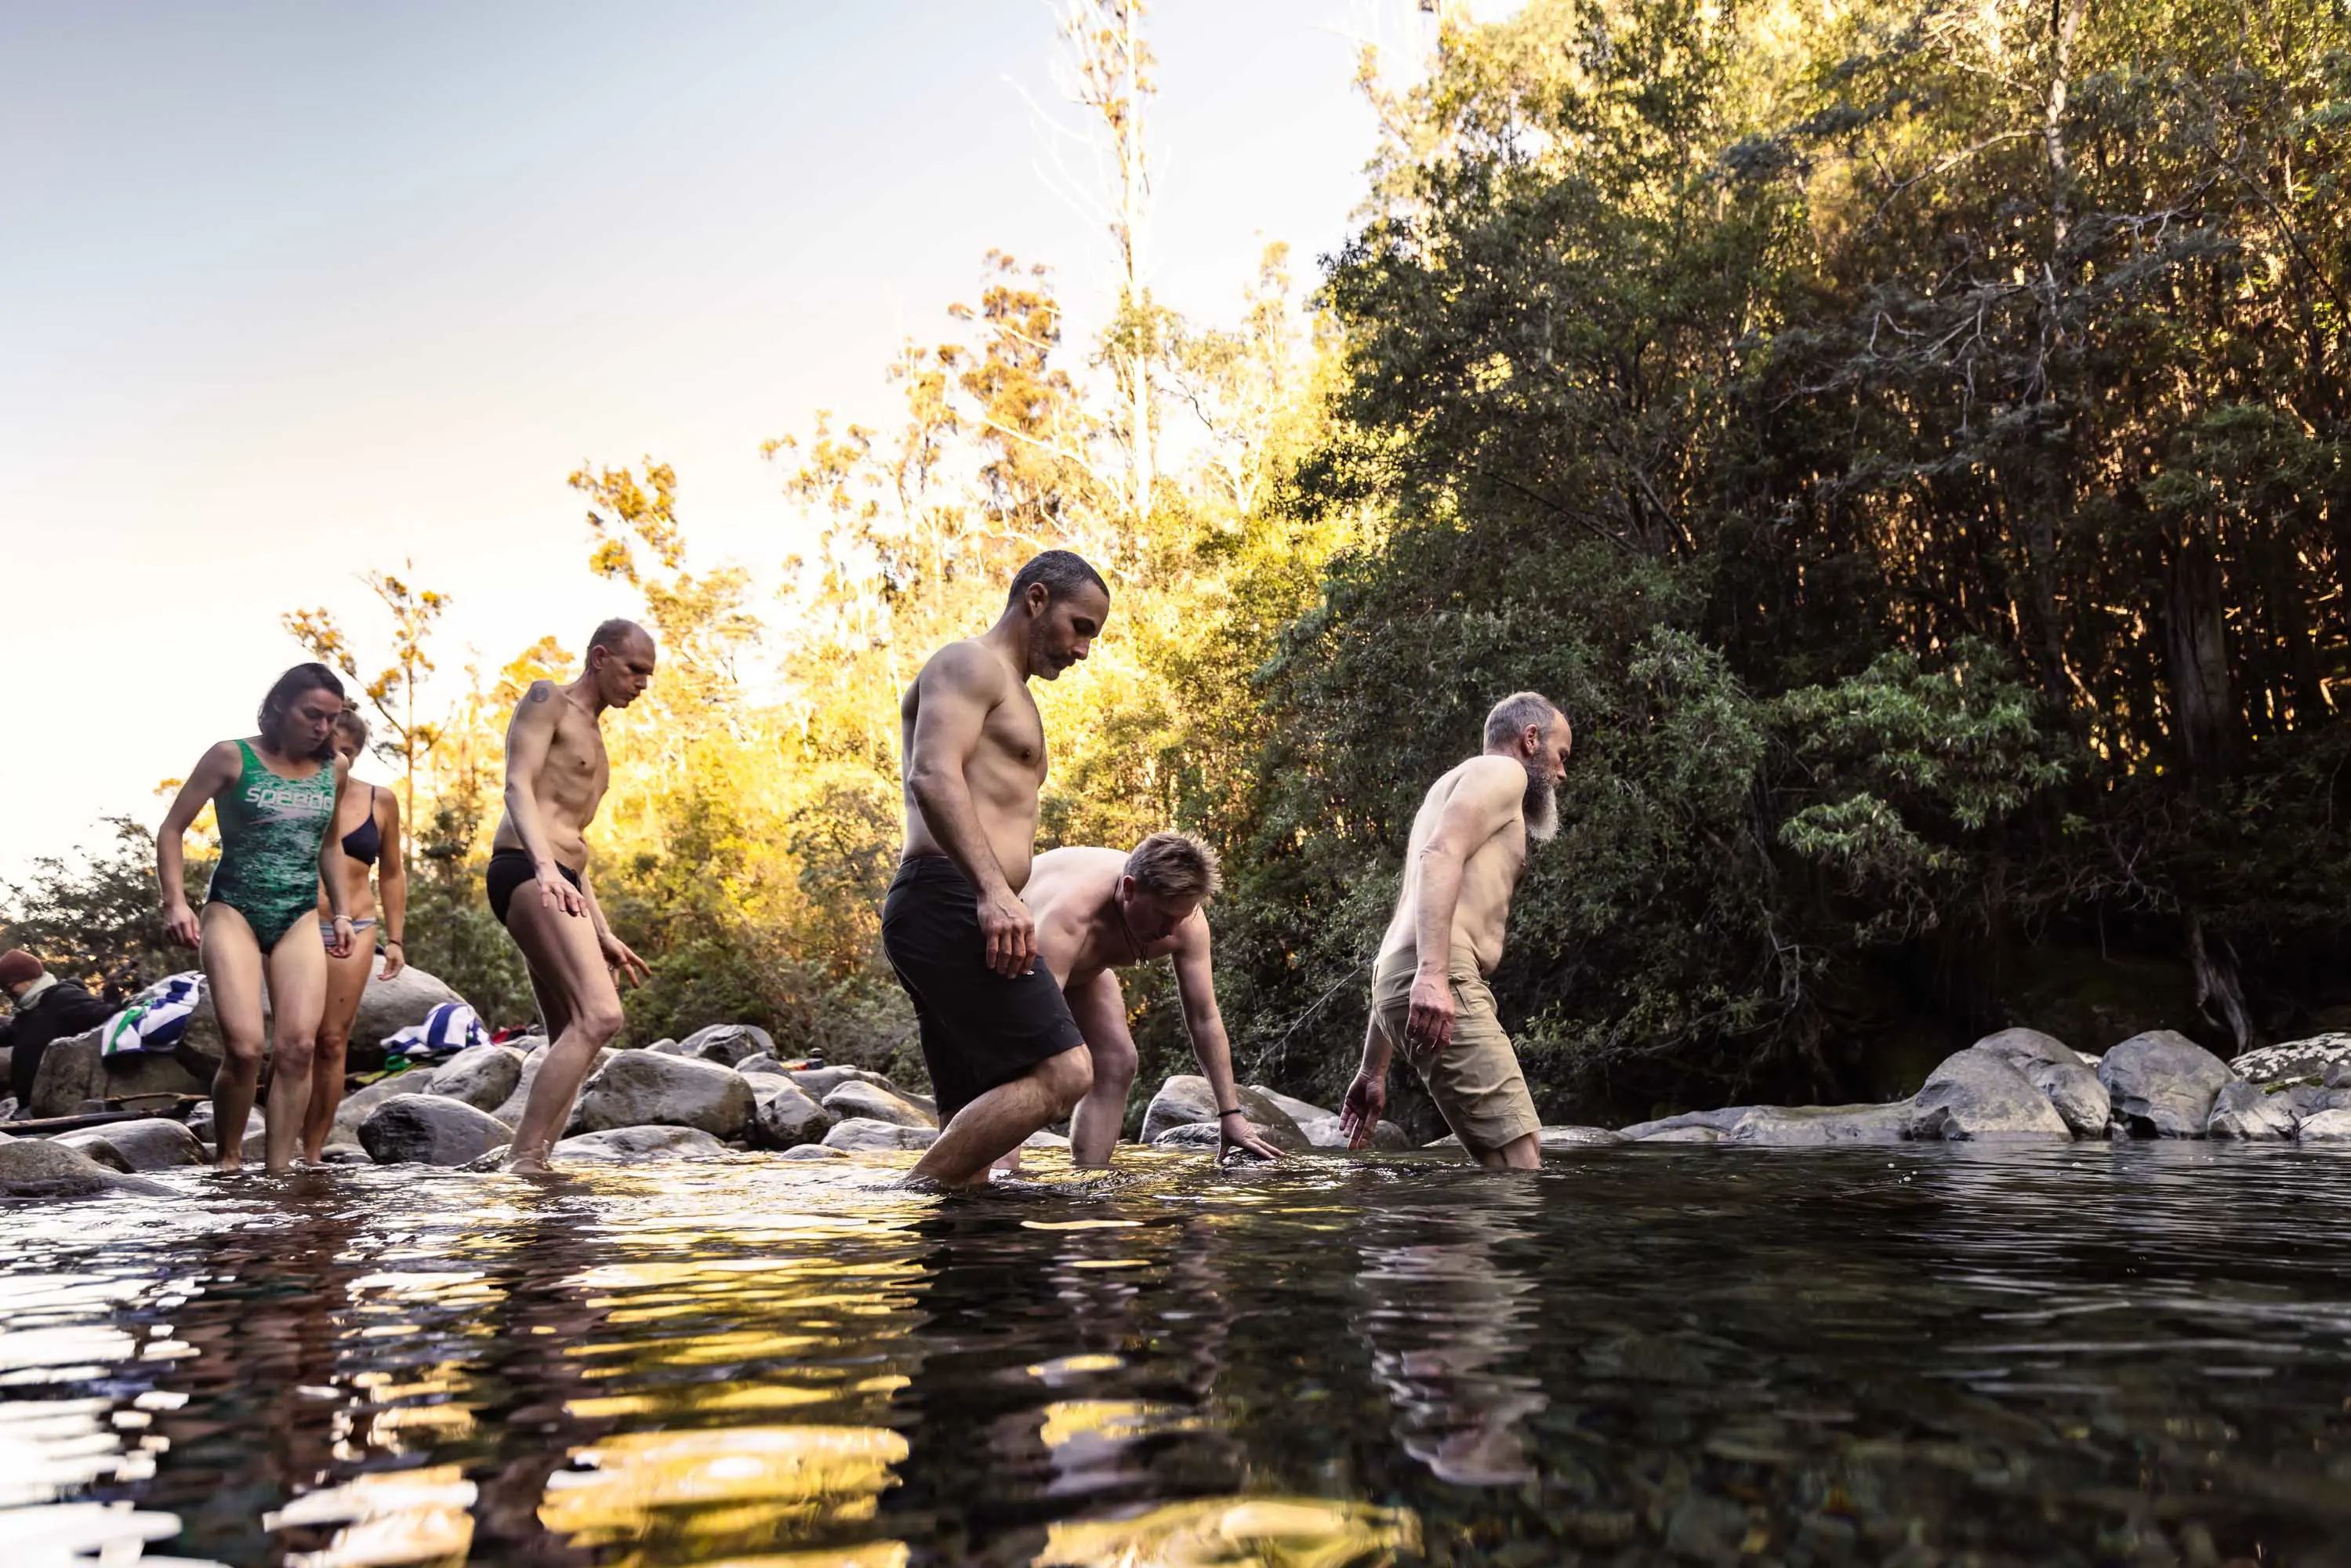 A group of people in swimming gear walk from the rocky edges of a pond in the forest into deeper water. 